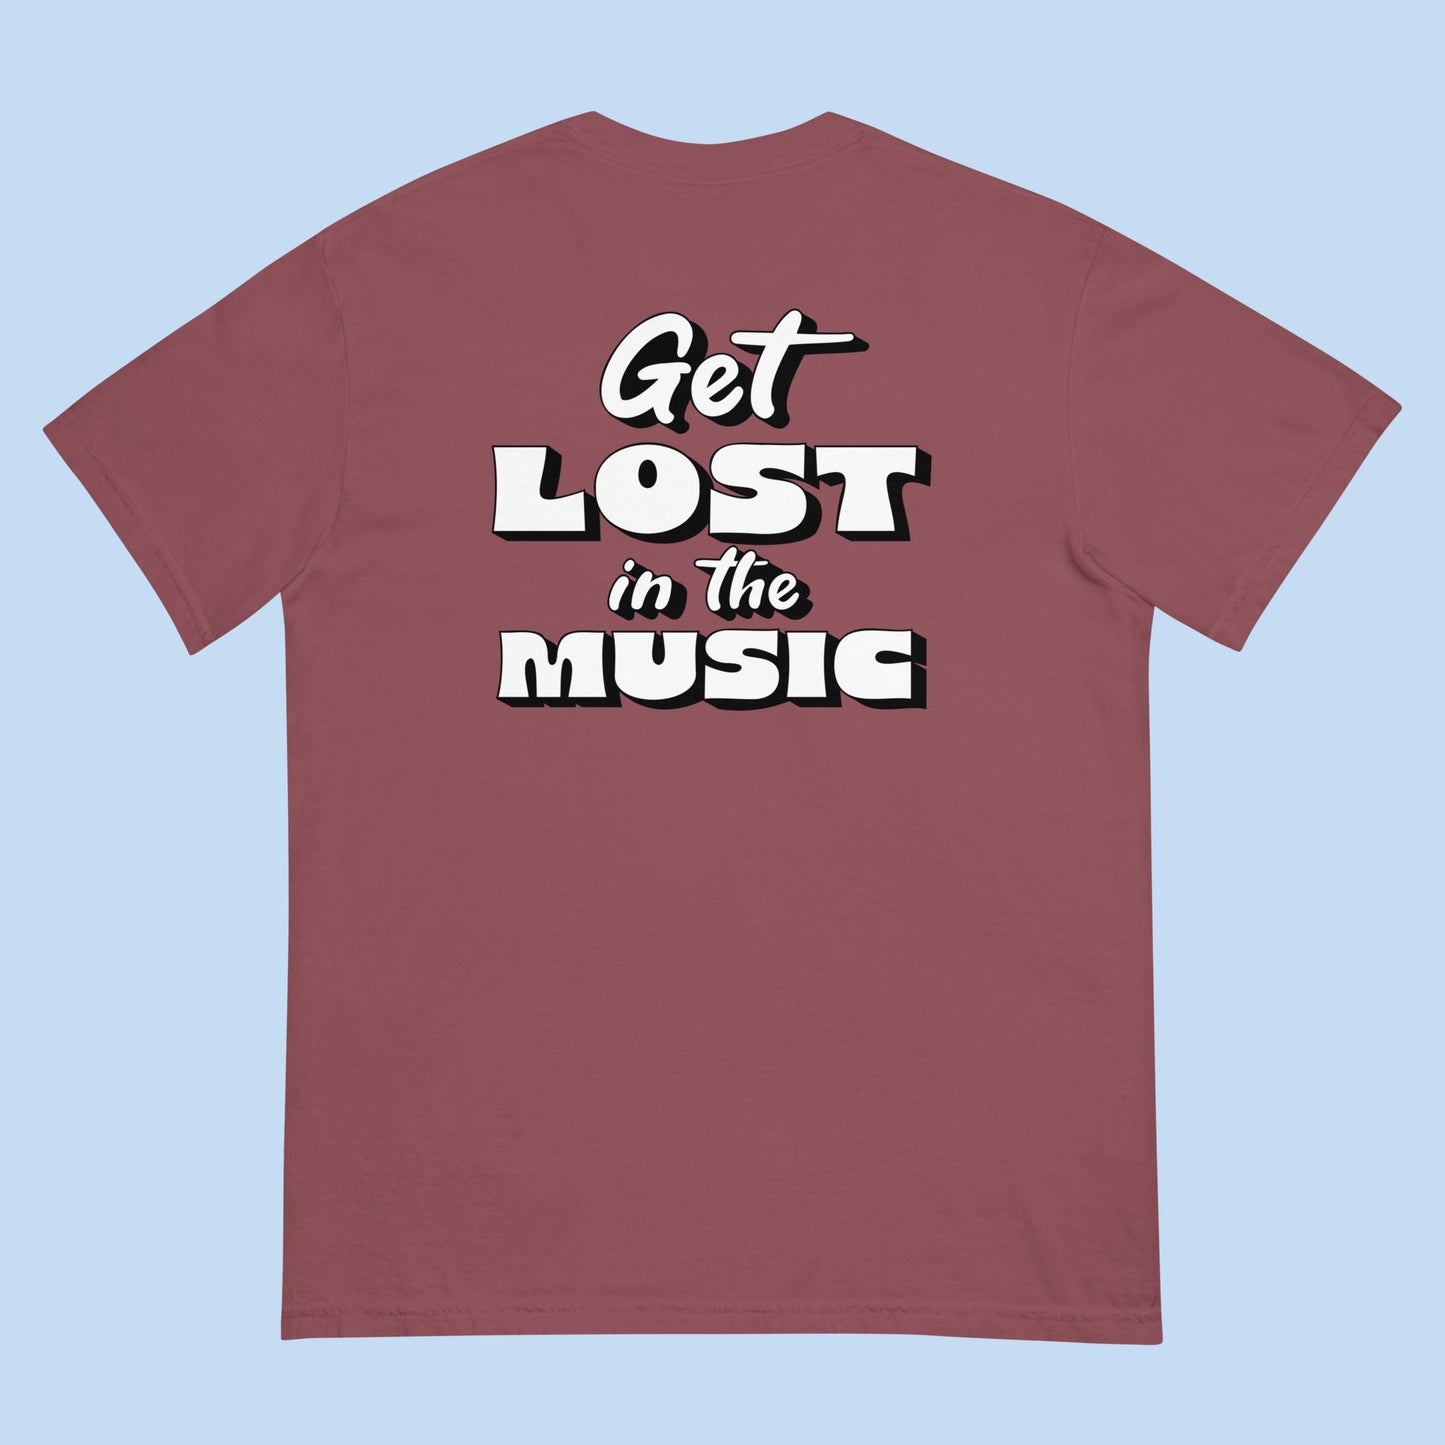 Get Lost in the Music Unisex Garment-Dyed Heavyweight T-Shirt